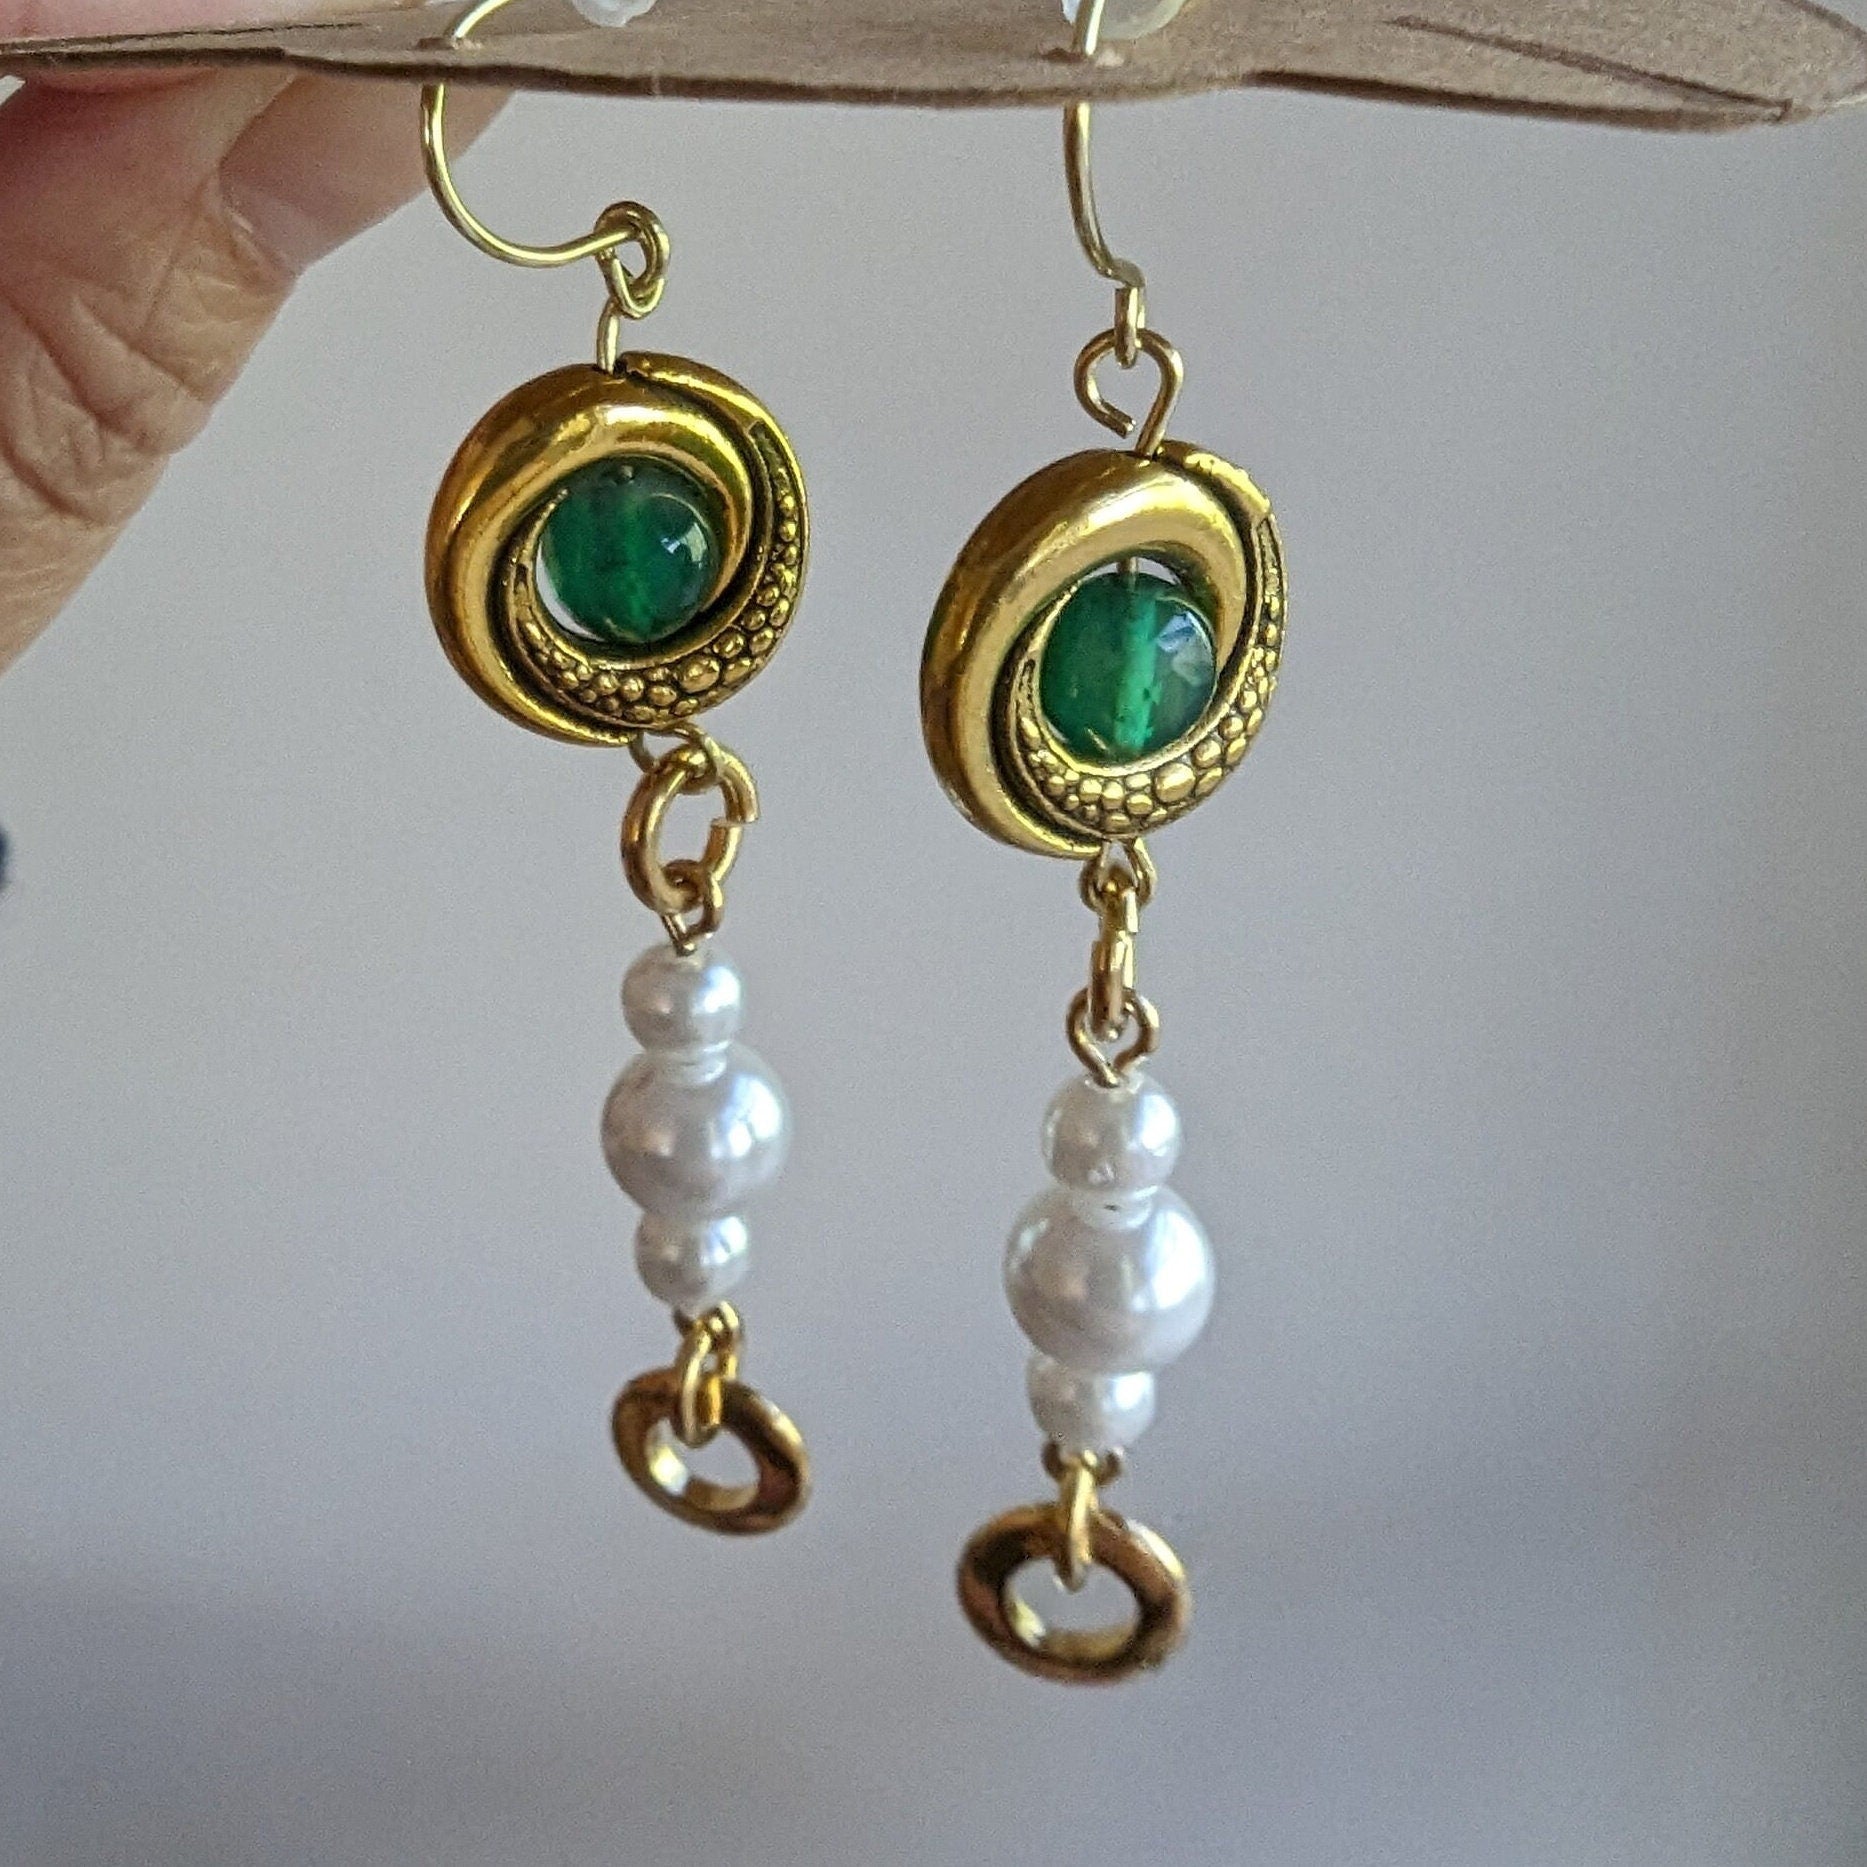 Jade Bead and String of Pearl Statement Earrings Asian Palace Inspired Earrings Collection